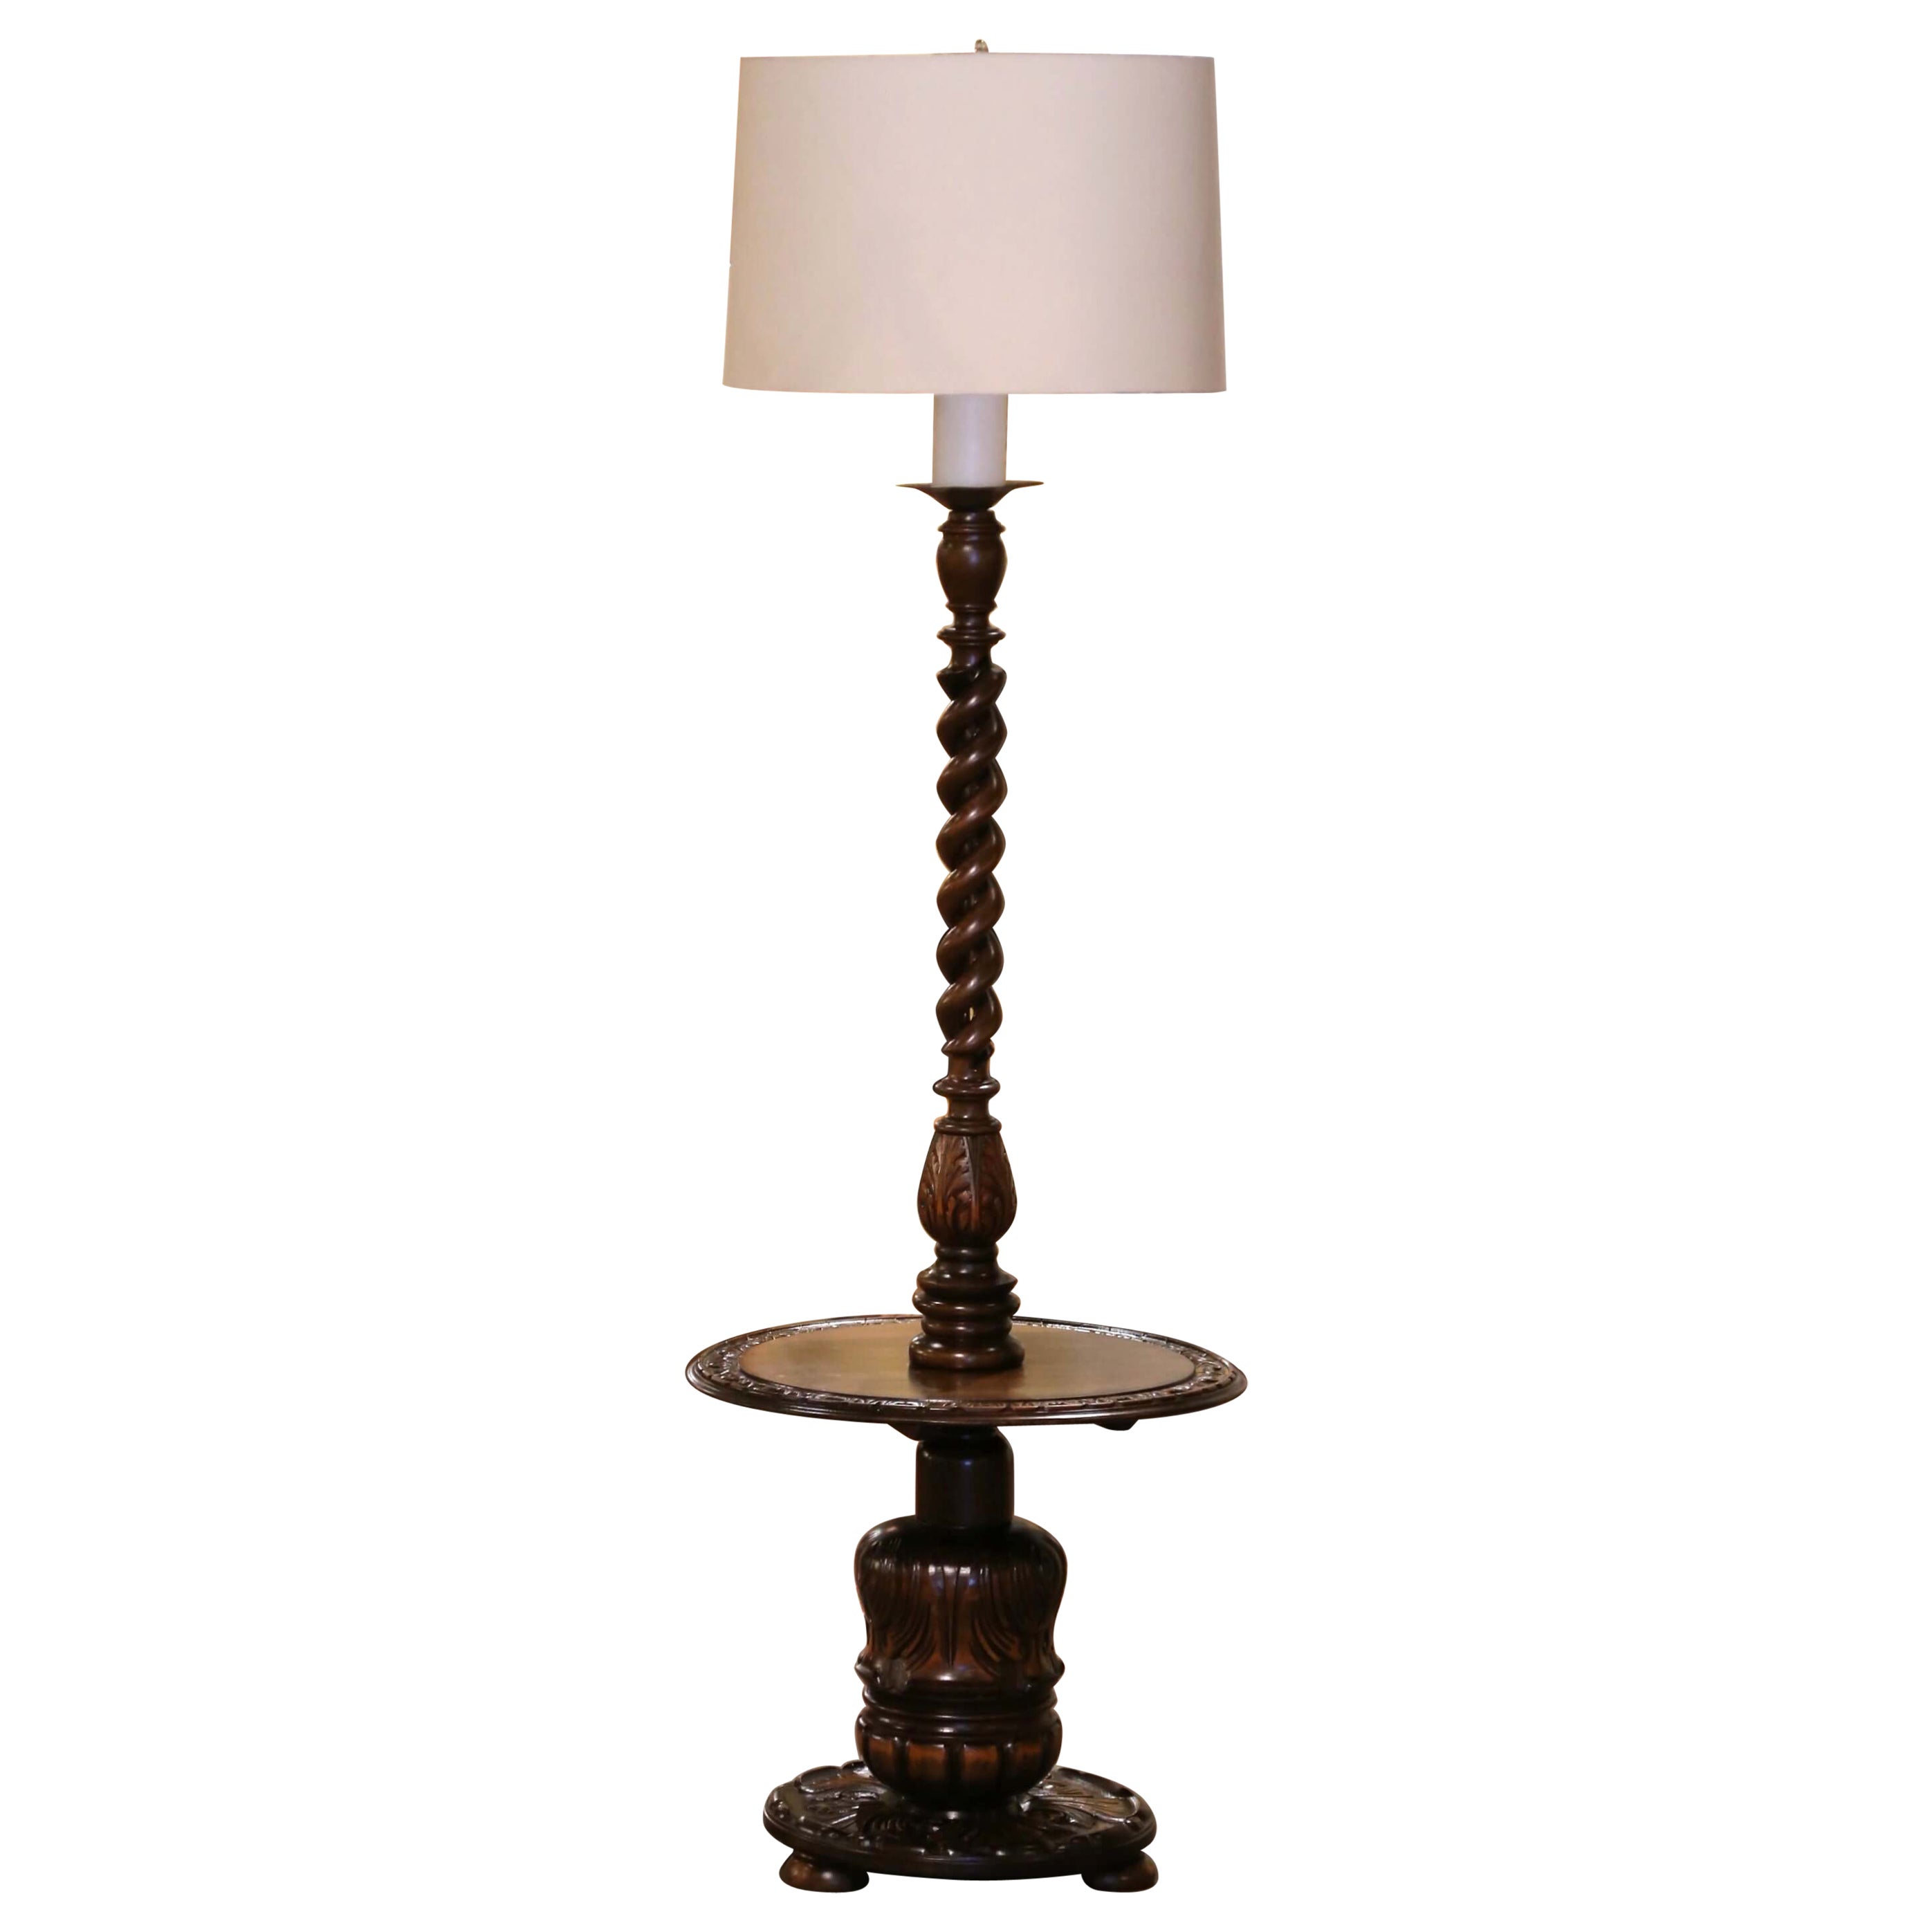 Early 20th Century French Carved Barley Twist Floor Lamp with Attached Table